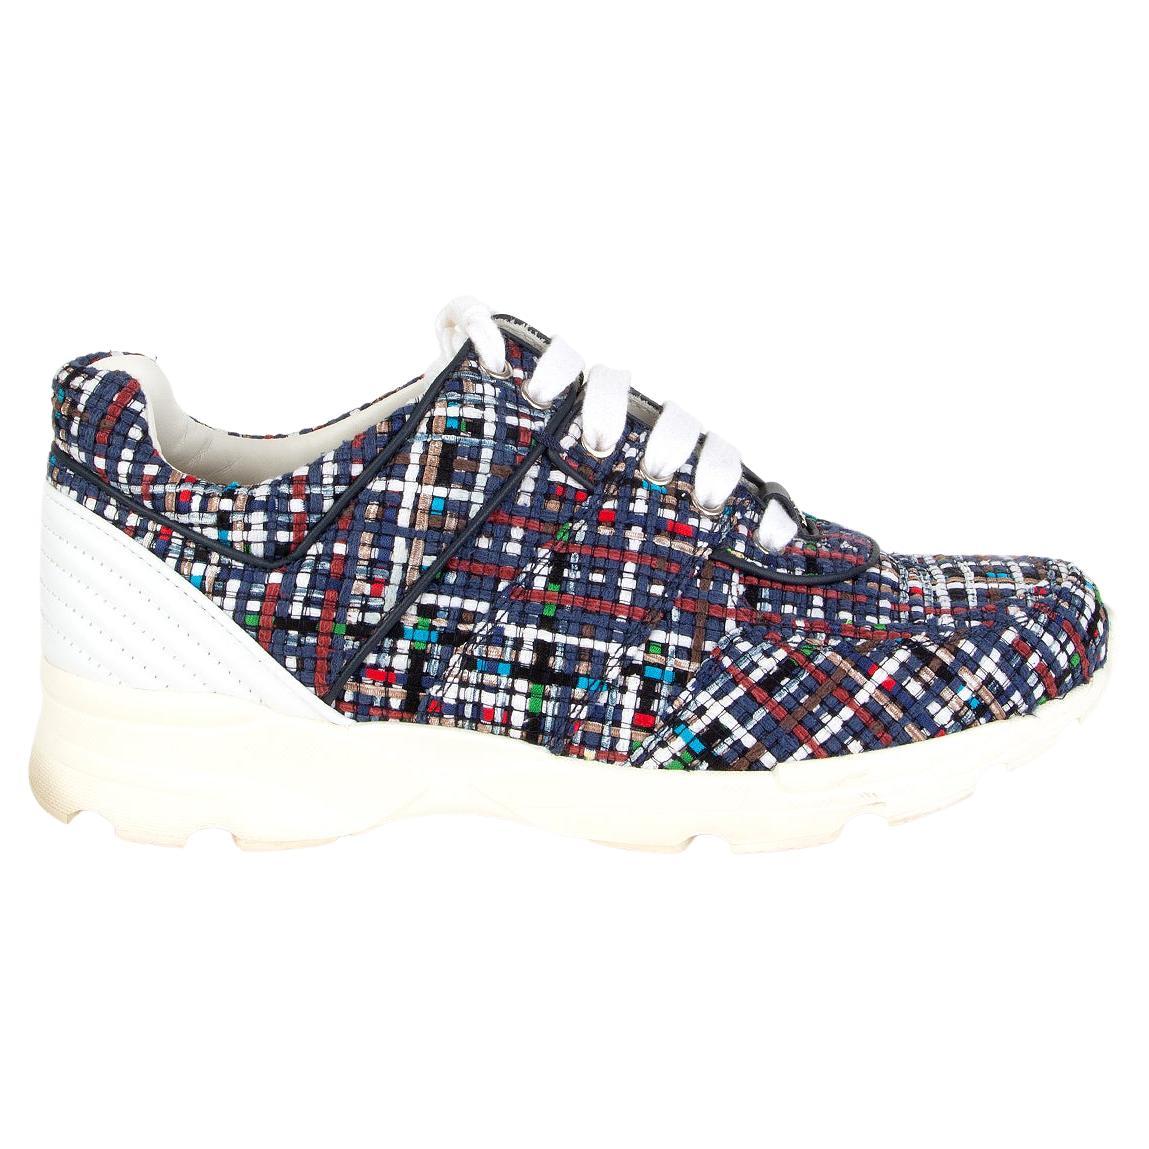 CHANEL blue white BOULCE TWEED Sneakers Shoes 38.5 For Sale